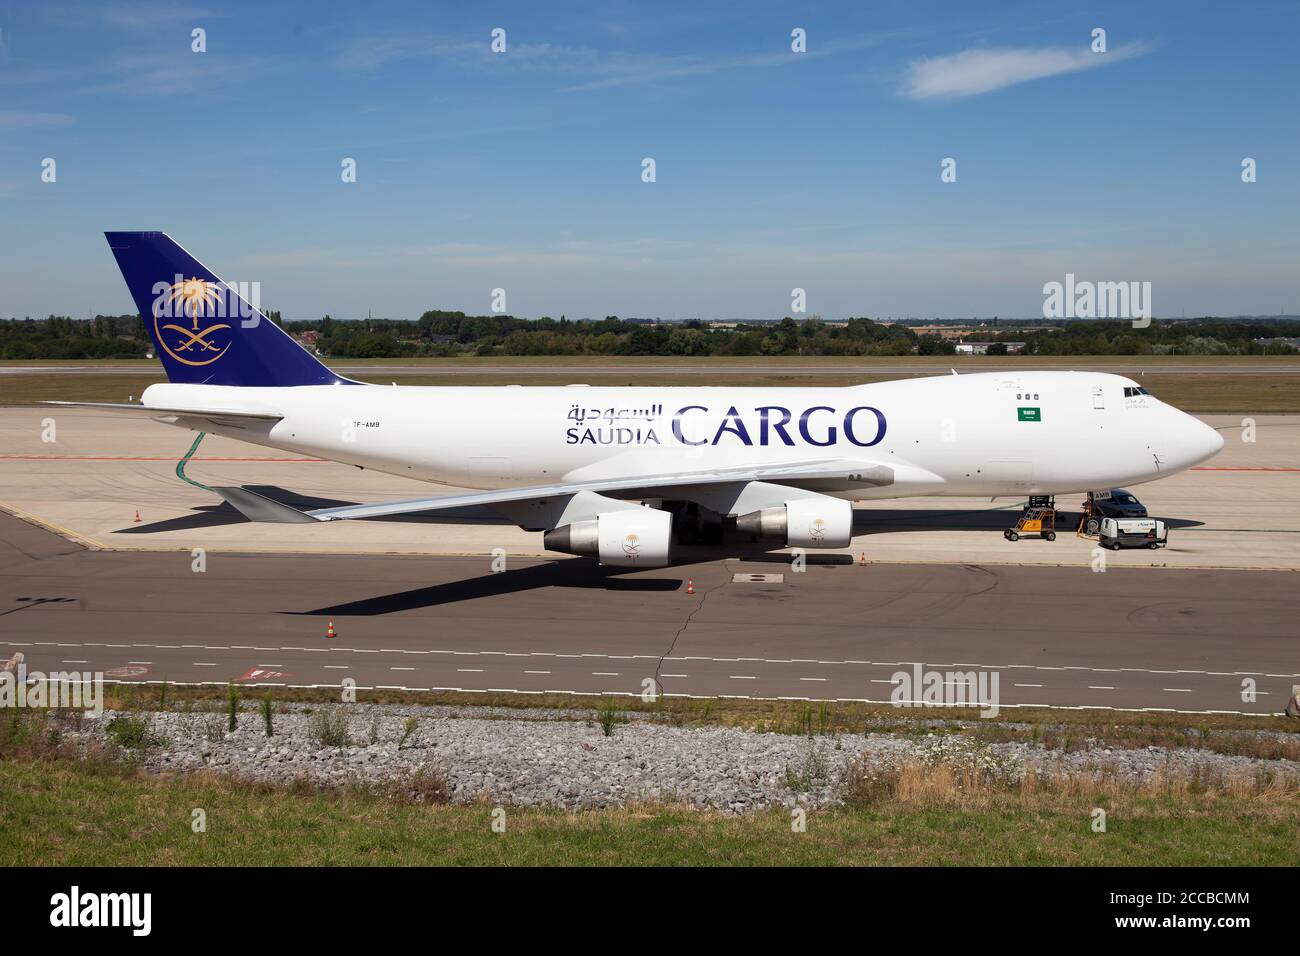 A Saudi Arabian Airlines Cargo (Air Atlanta Icelandic) Boeing 747-400 freighter parked at Liege Bierset airport. Stock Photo